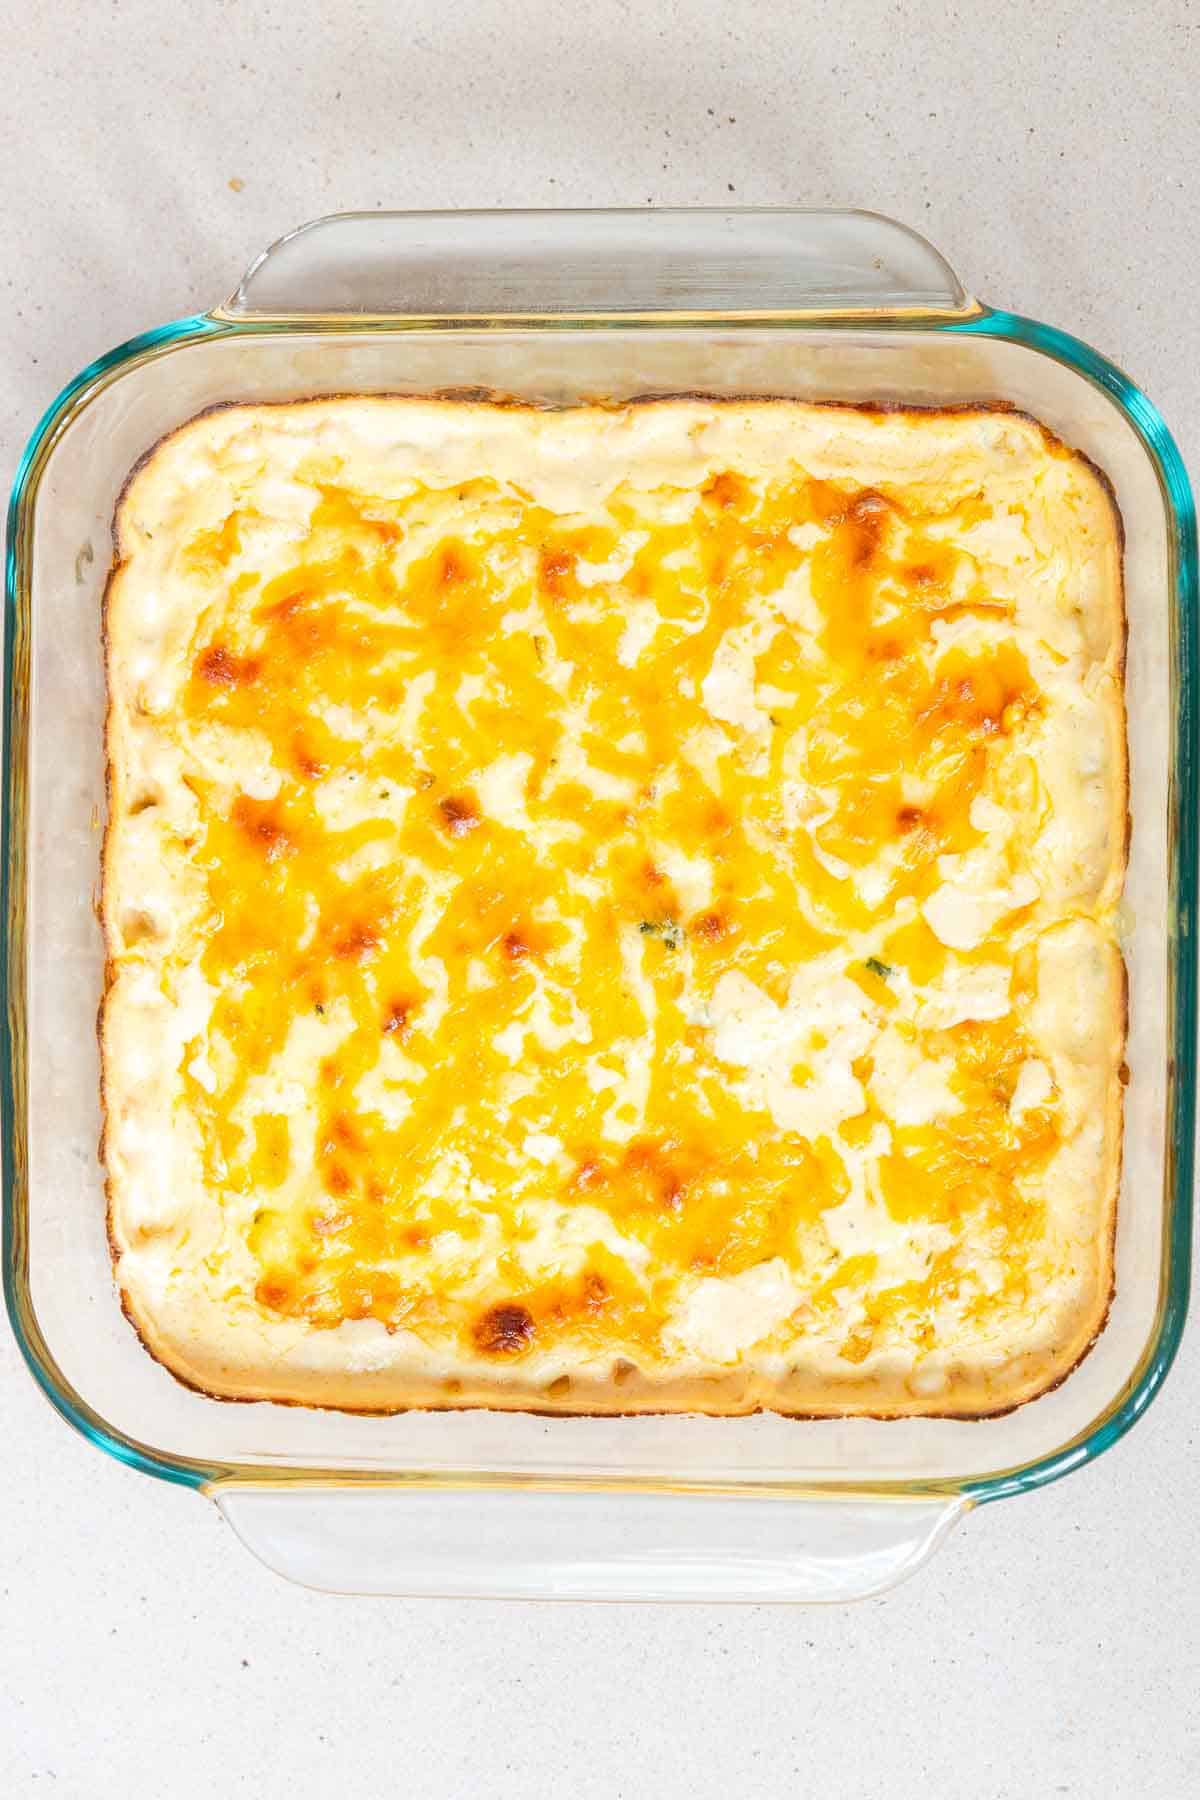 The Jalapeño Corn Casserole is baked until the cheese is golden and the casserole is bubbling.